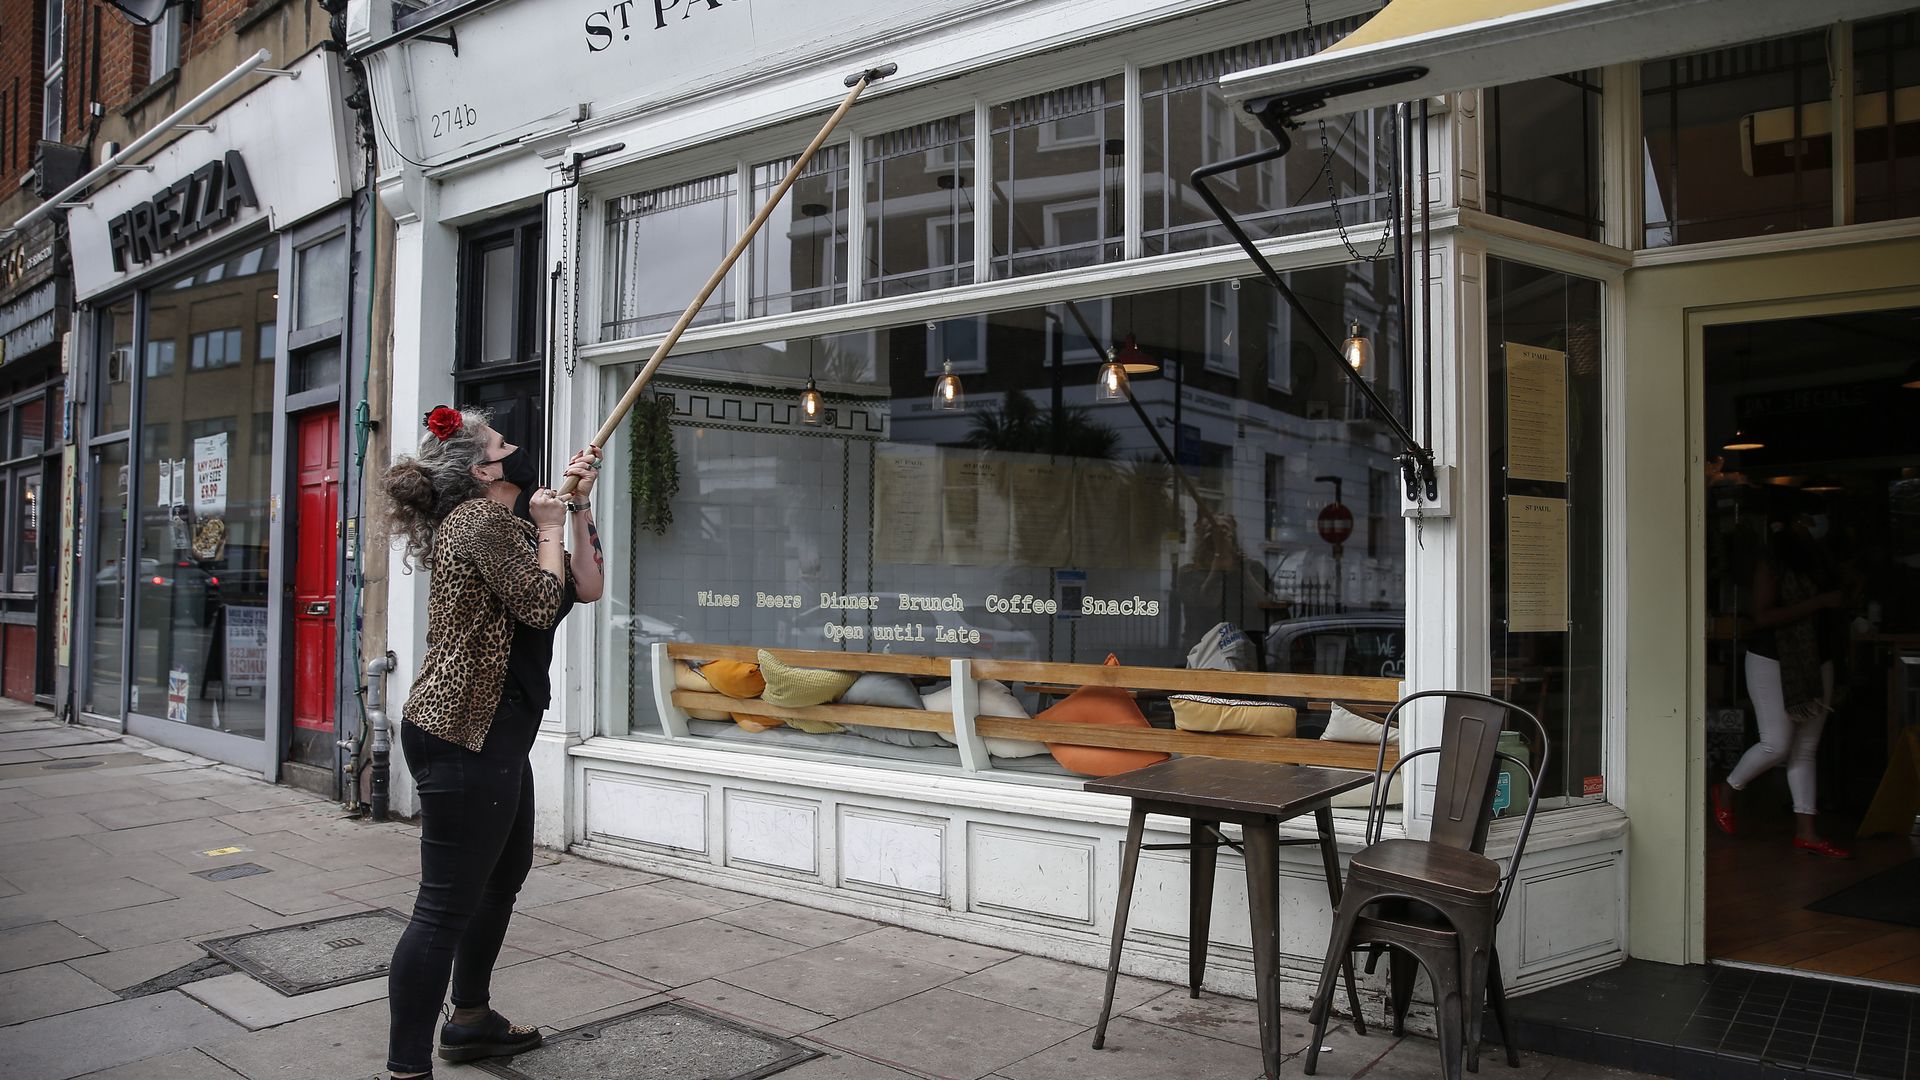 A cafe worker closes awnings in England.